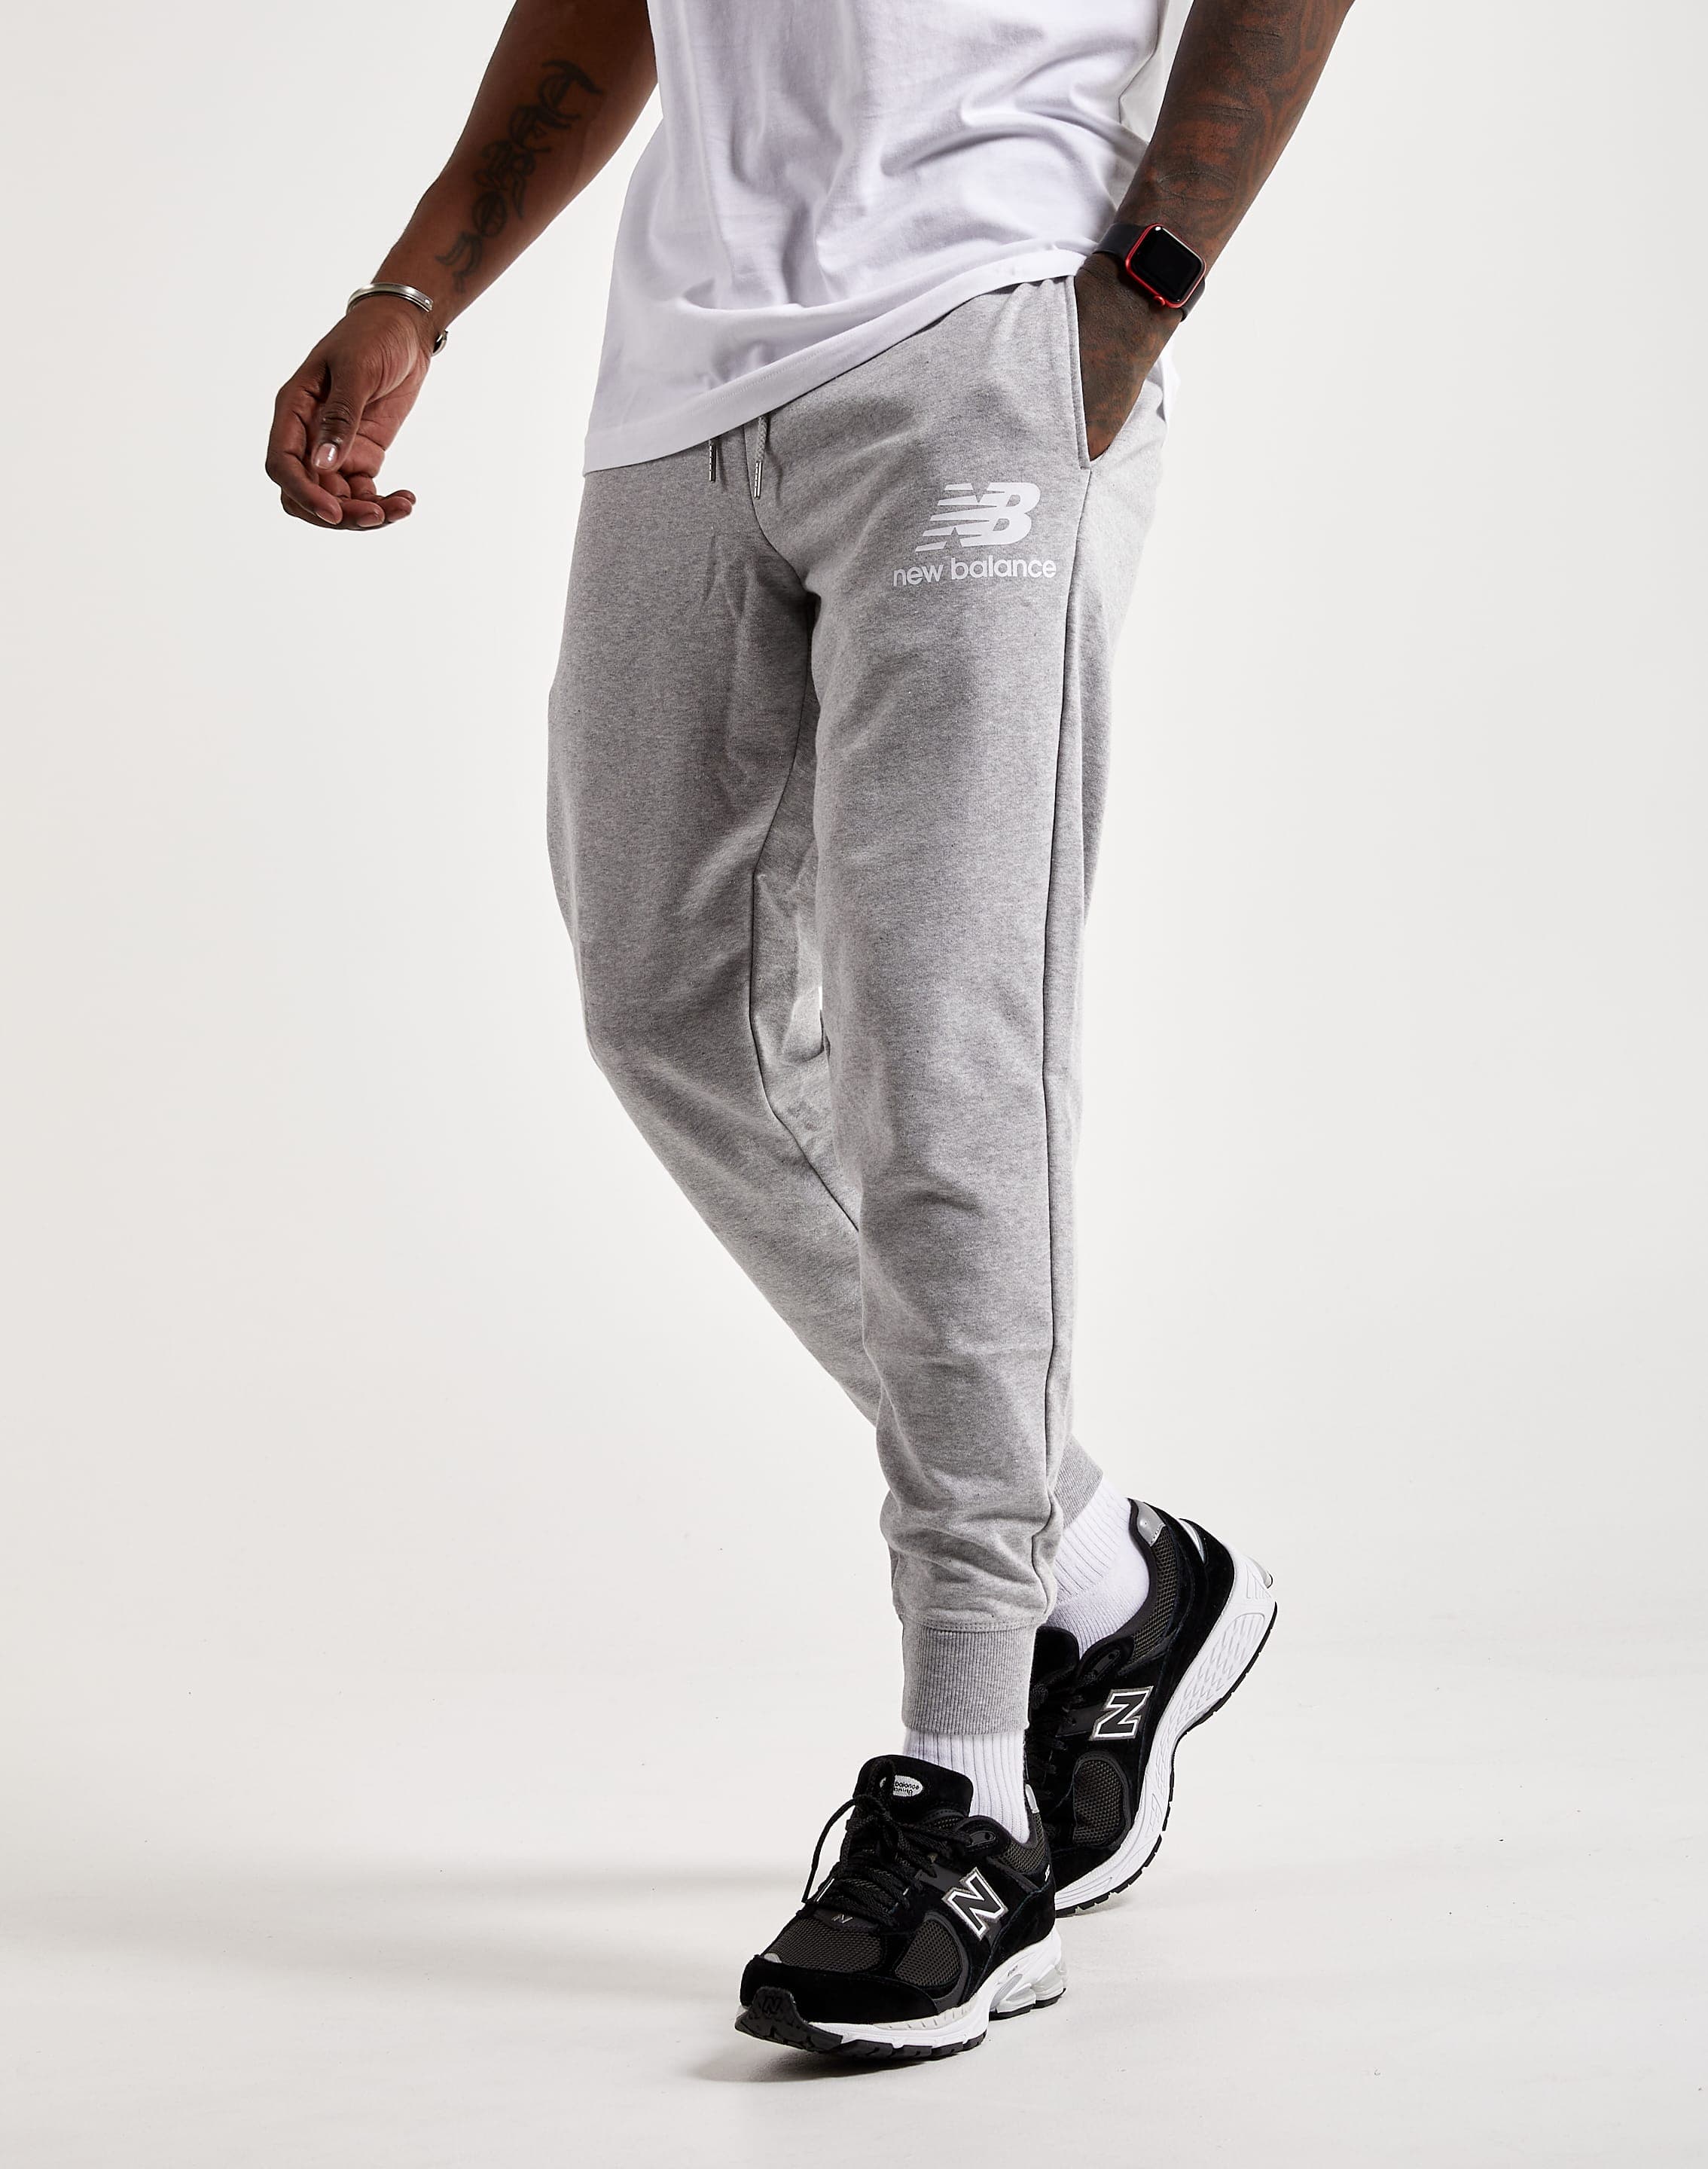 Stacked Balance DTLR Essentials – New Joggers